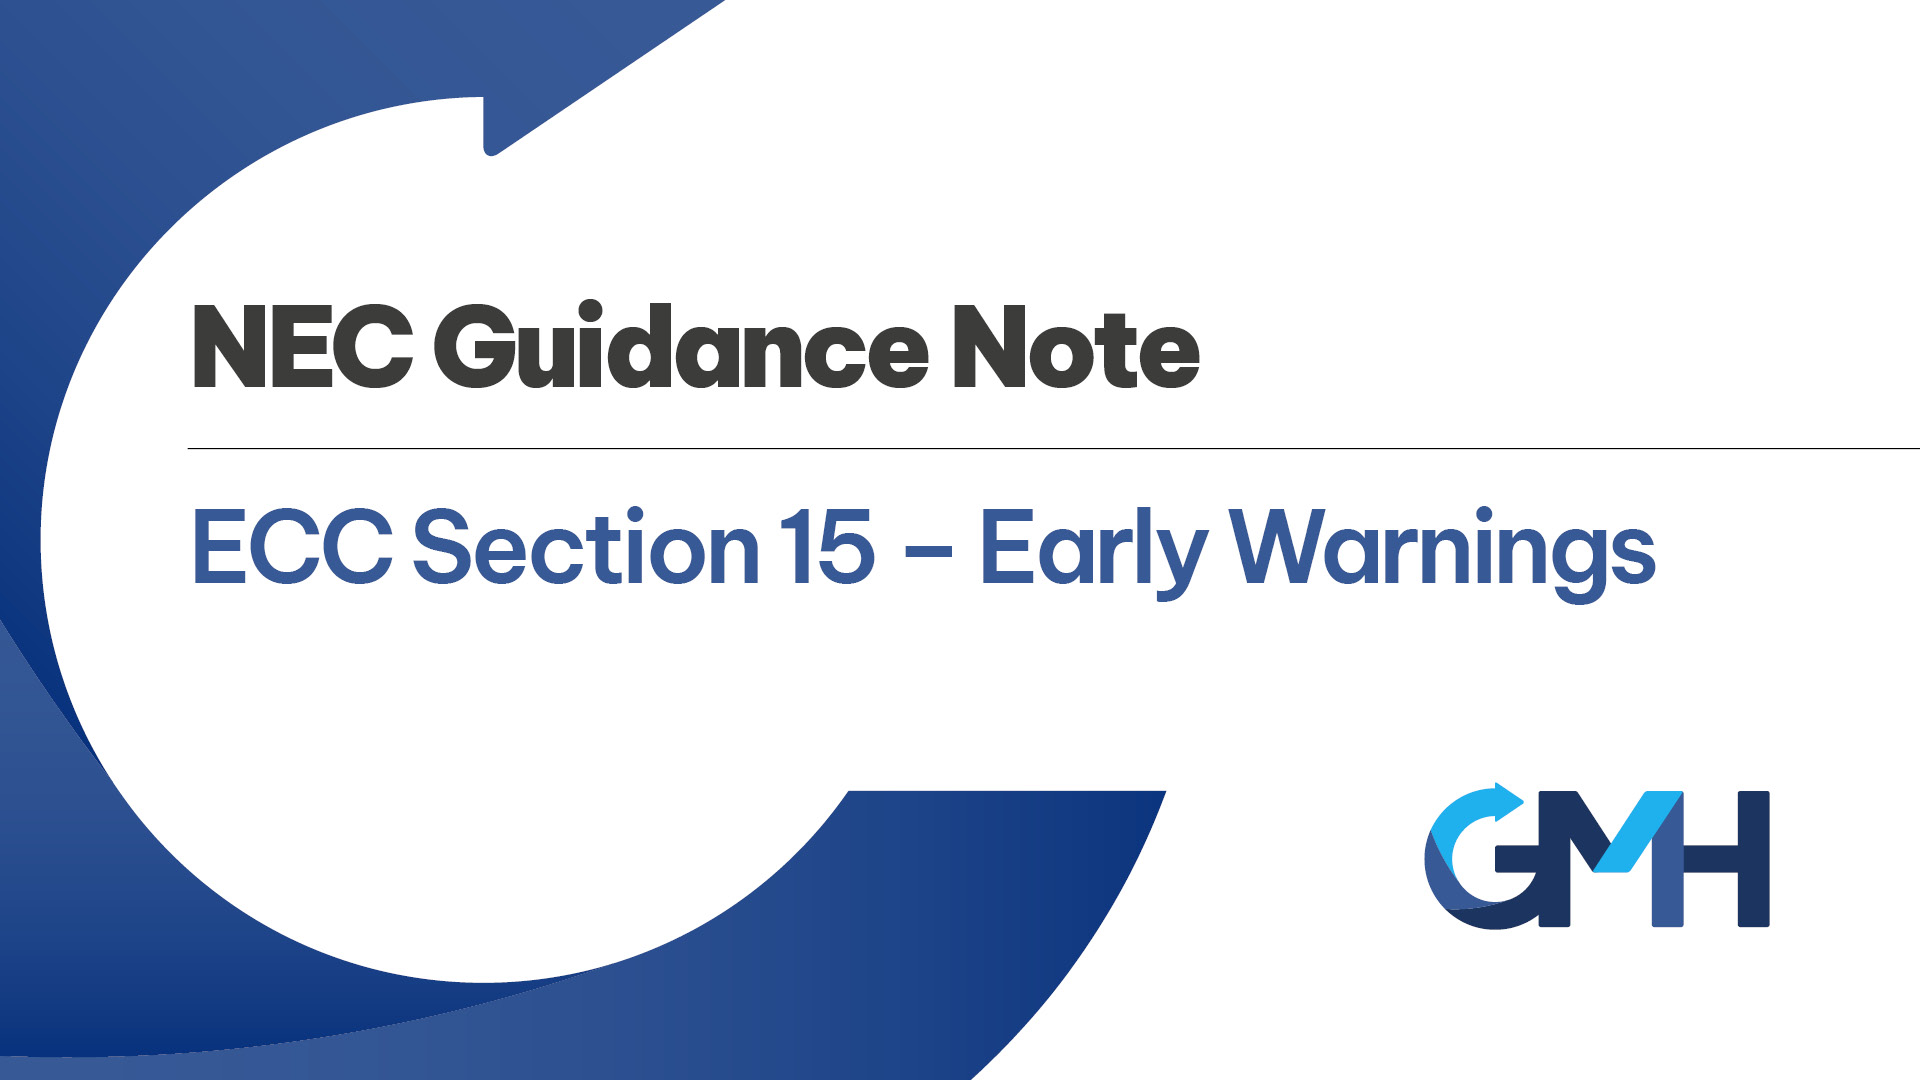 NEC EECC Section 15 Early Warnings NEC Guidance Note